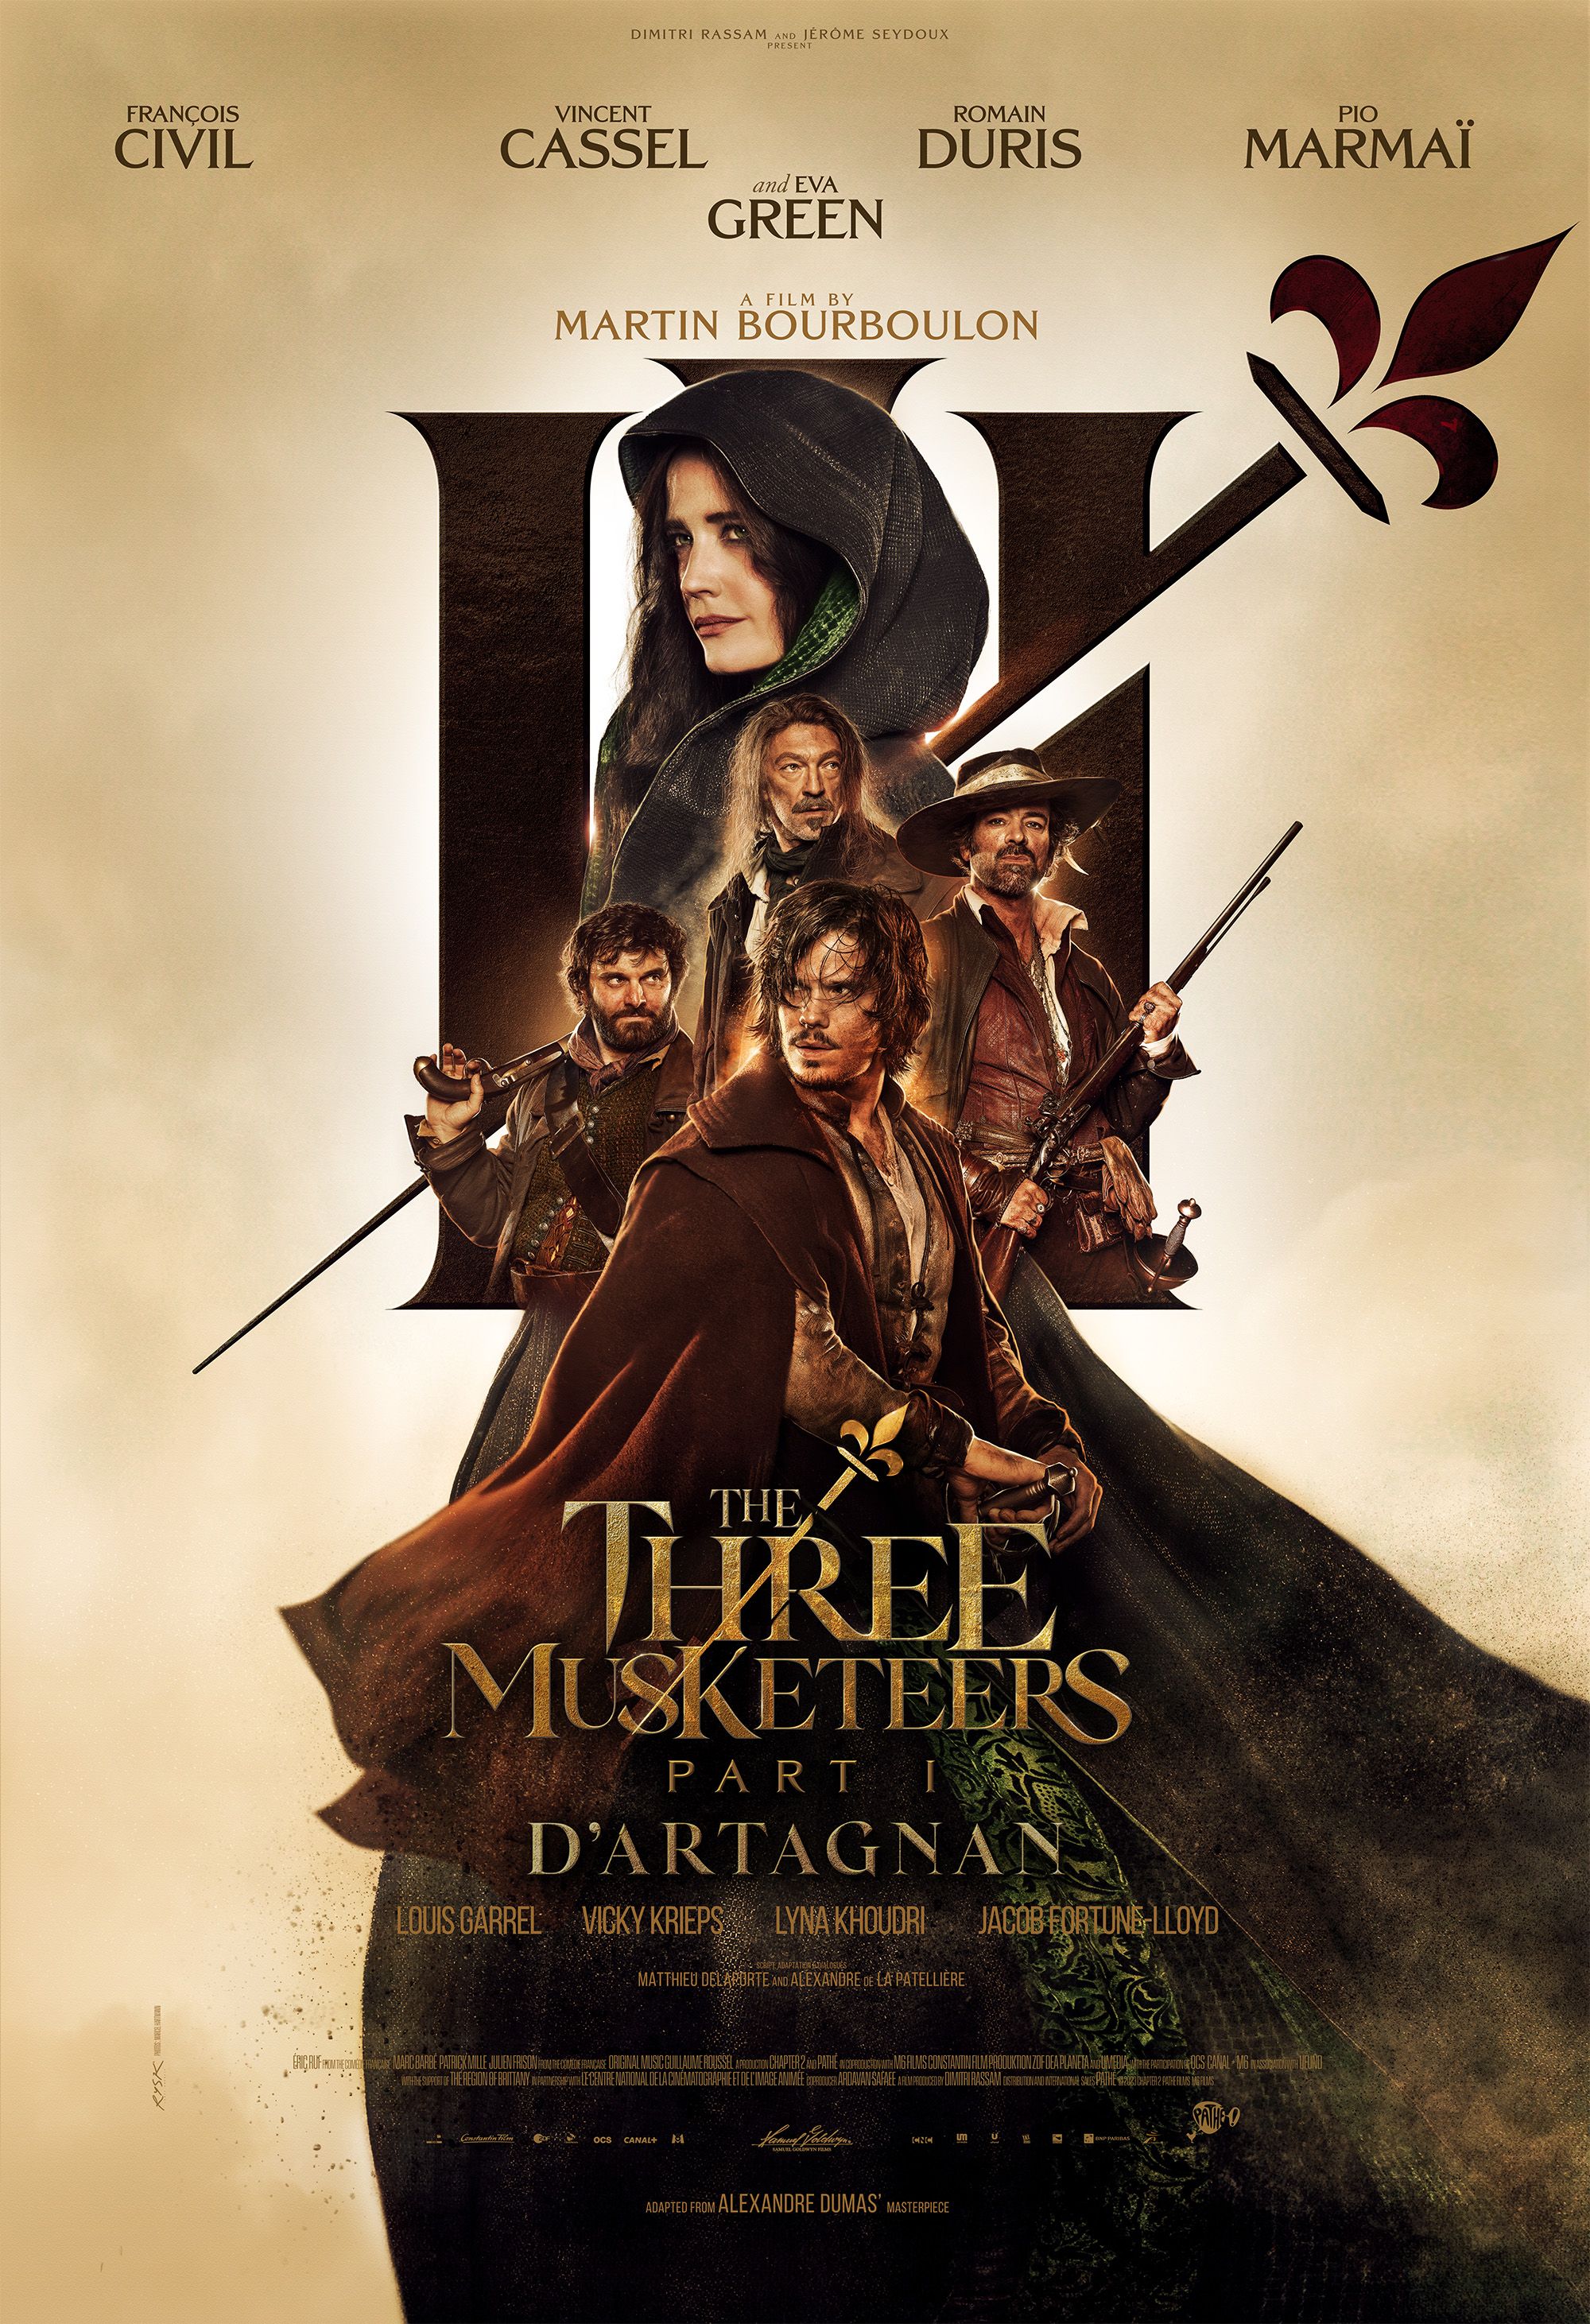 The Three Musketeers - Part I DArtagnan Film Poster